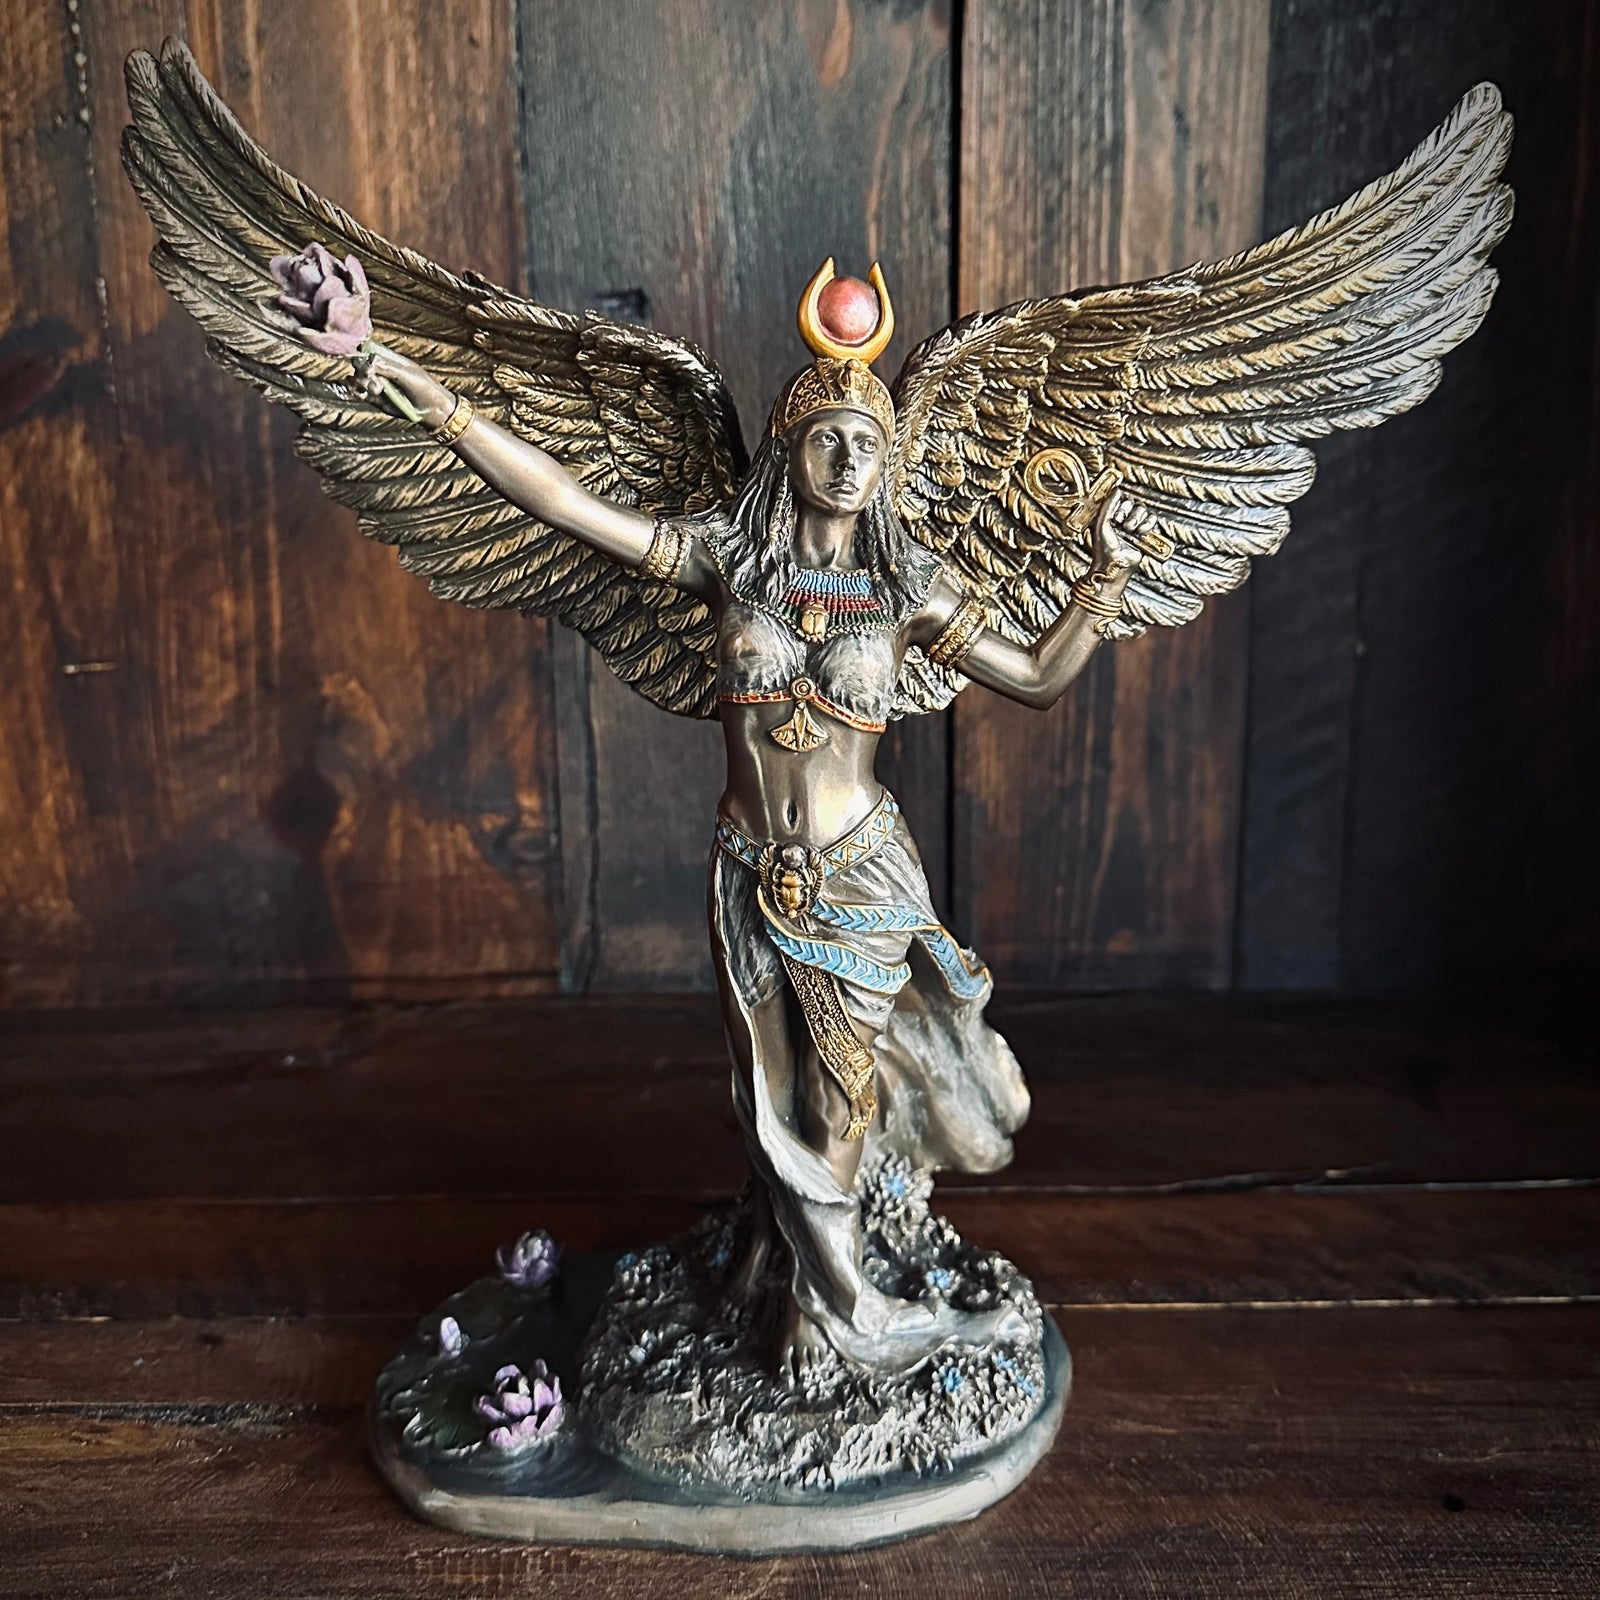 The Winged Goddess Isis